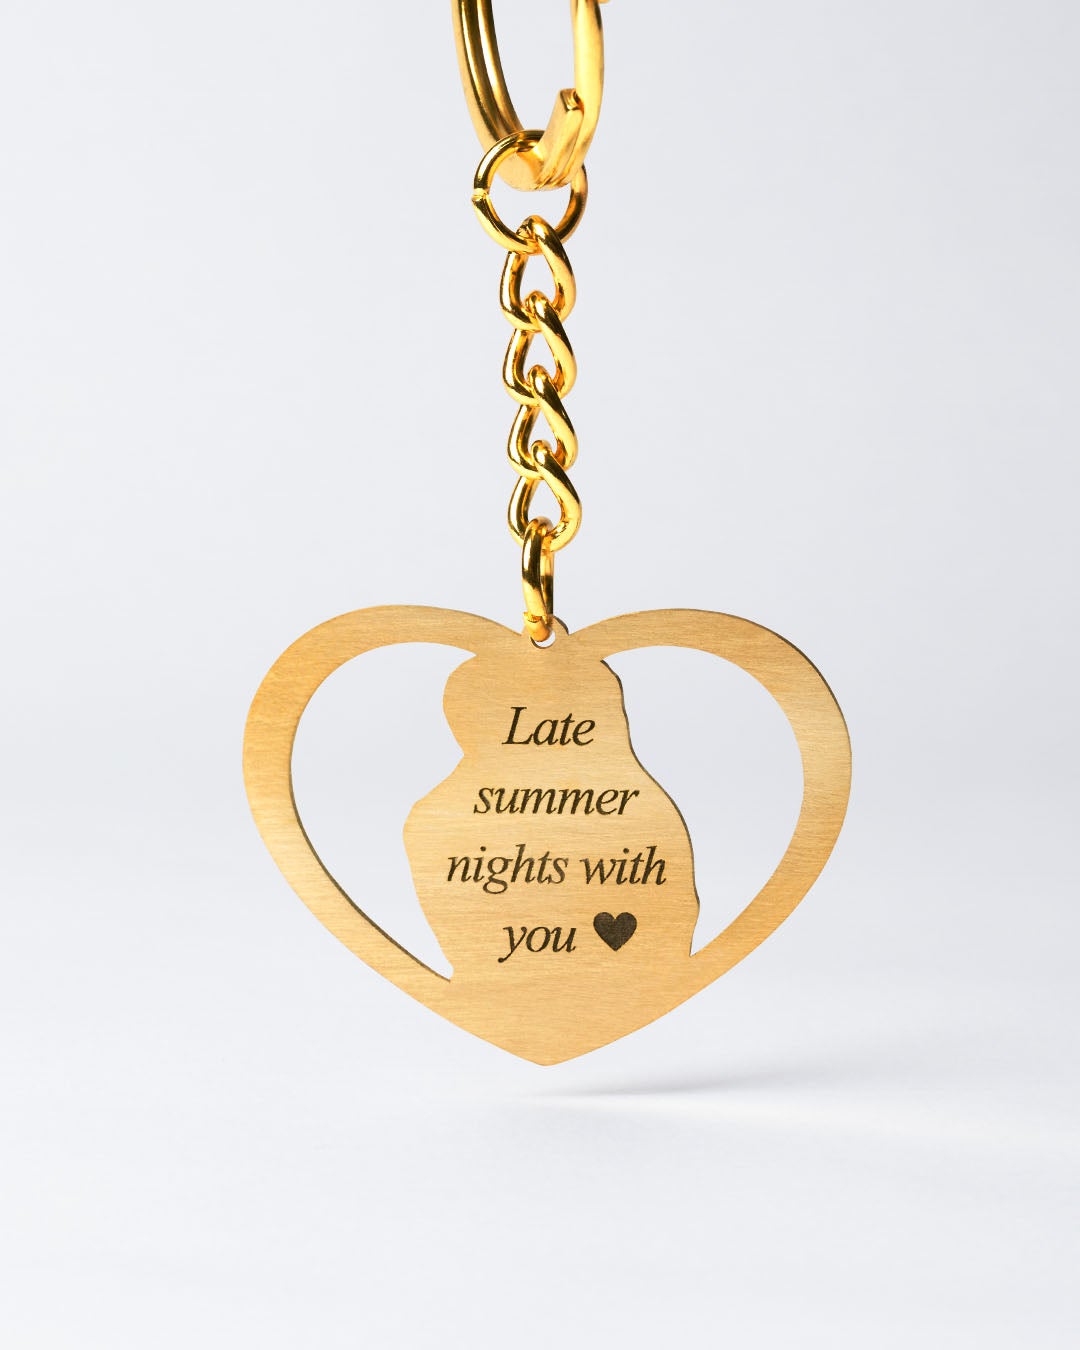 Memorial jewellery, Gold halo heart keychain engraving